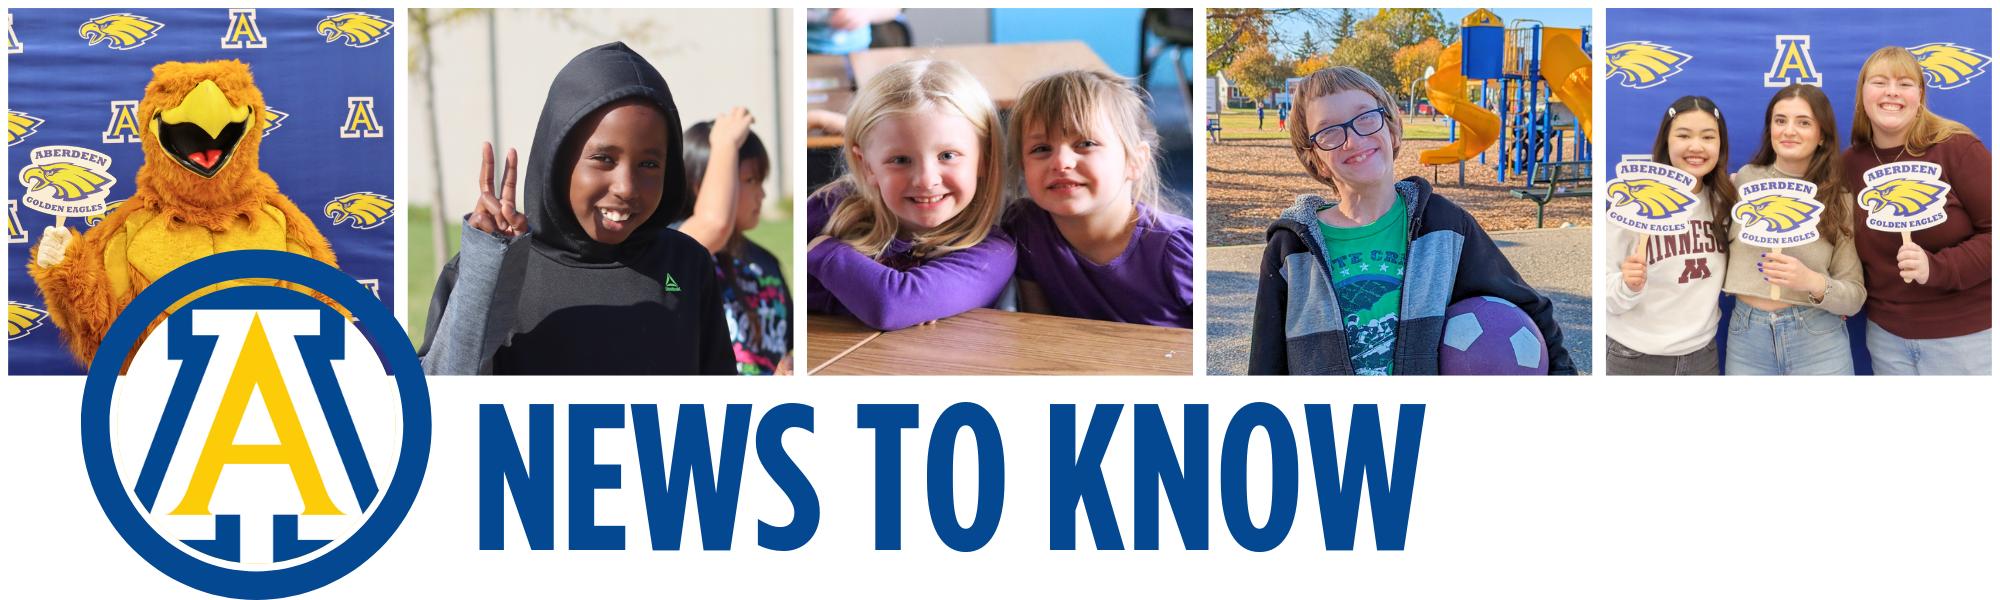 News to Know collage graphic with student photos